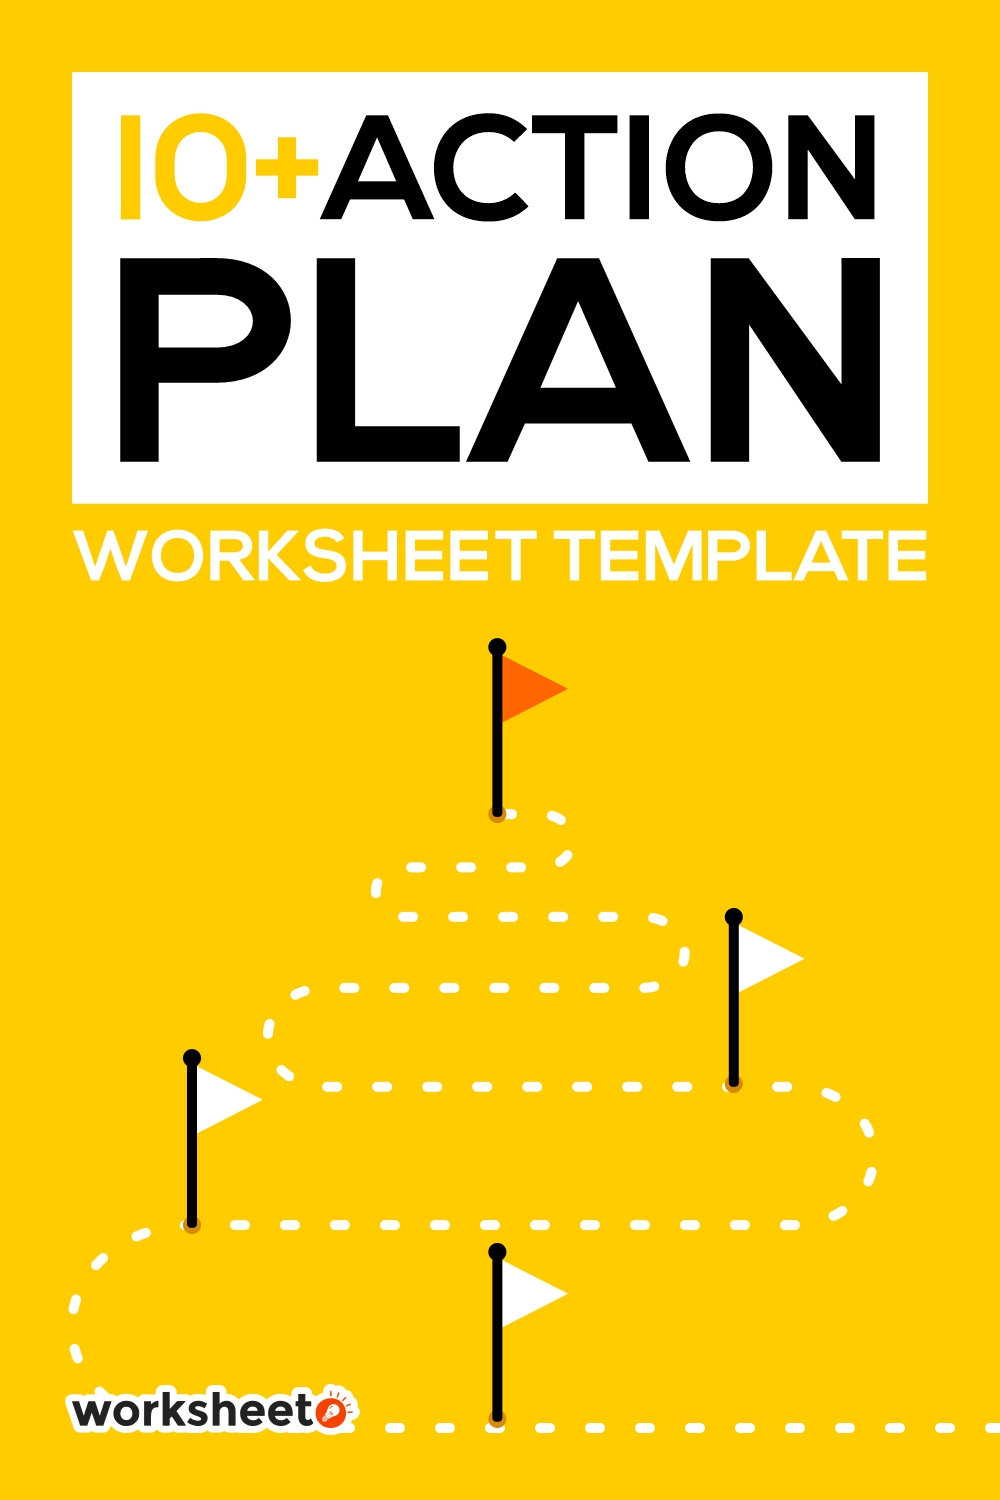 15 Images of Action Plan Worksheet Template